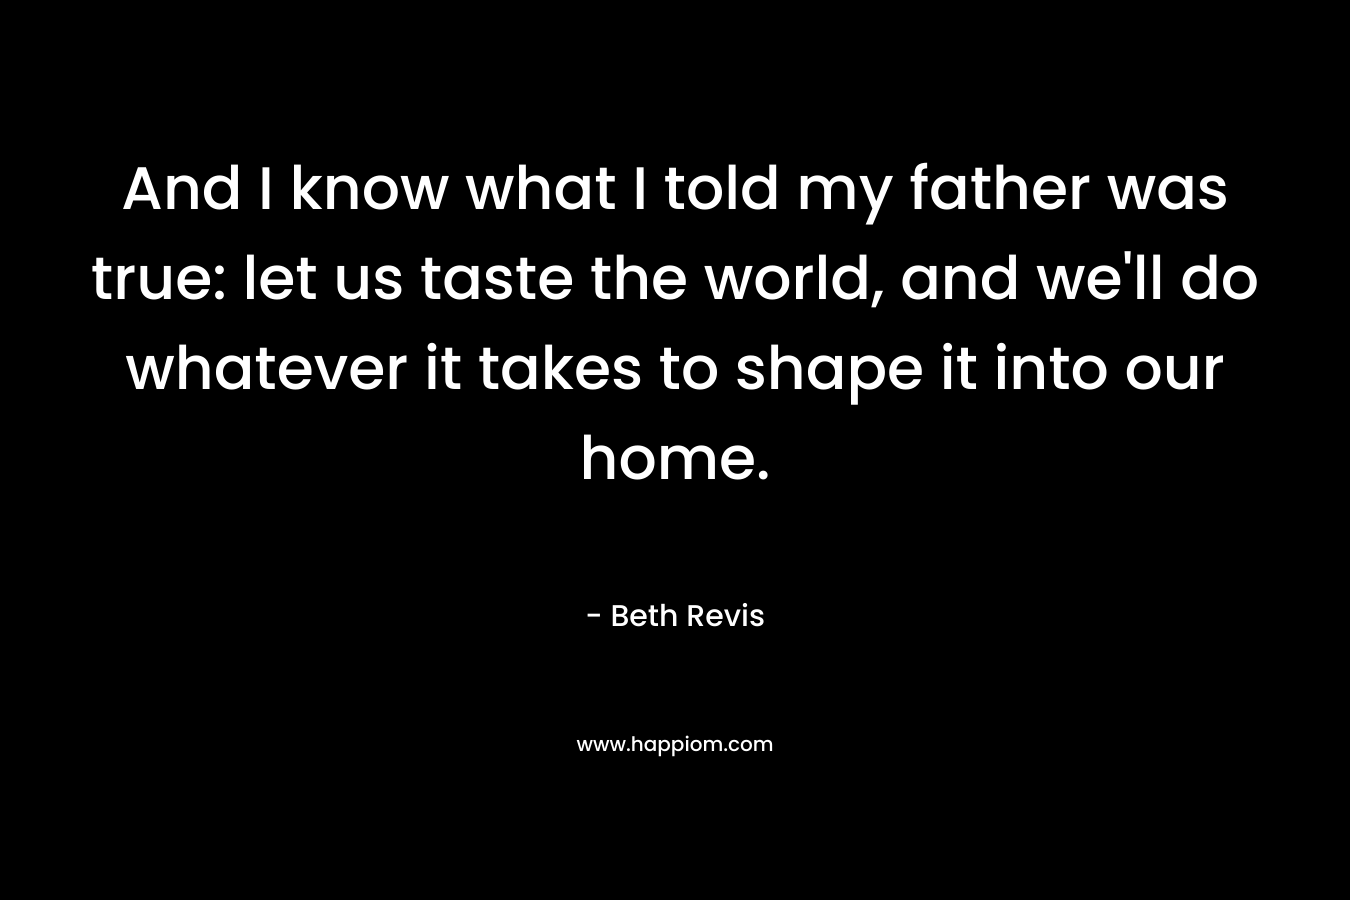 And I know what I told my father was true: let us taste the world, and we'll do whatever it takes to shape it into our home.